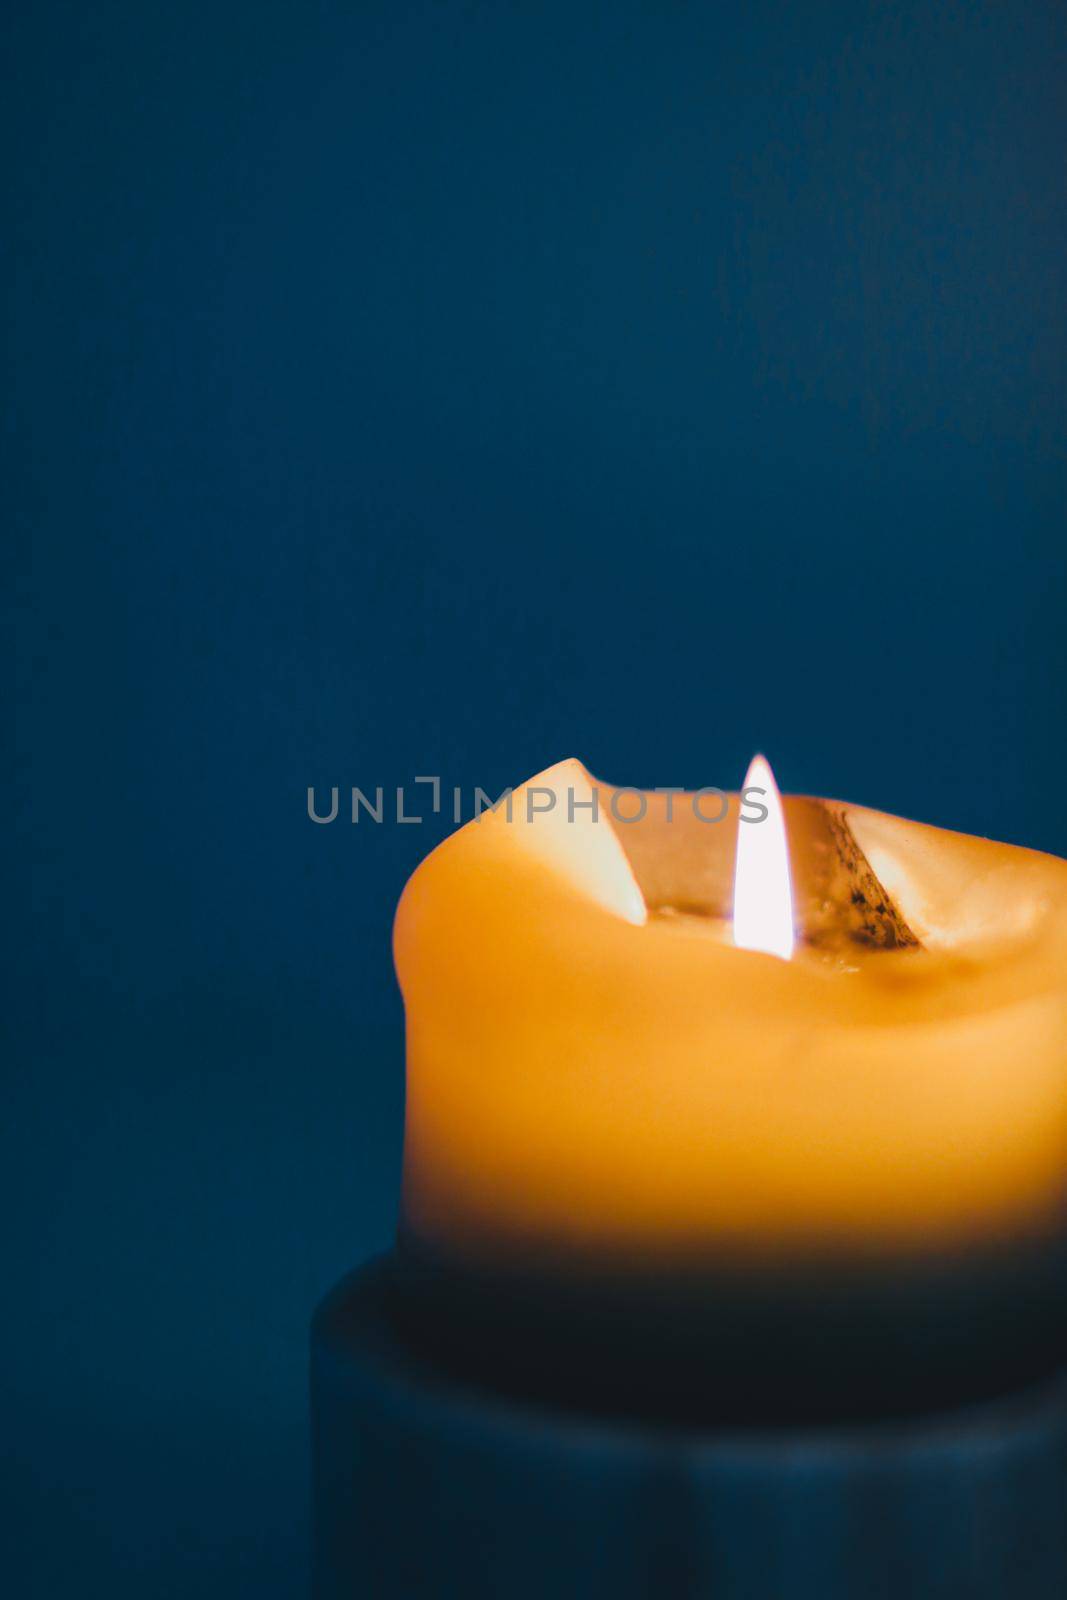 Happy holidays, greeting card backdrop and winter season concept - Yellow holiday candle on blue background, luxury branding design and decoration for Christmas, New Years Eve and Valentines Day